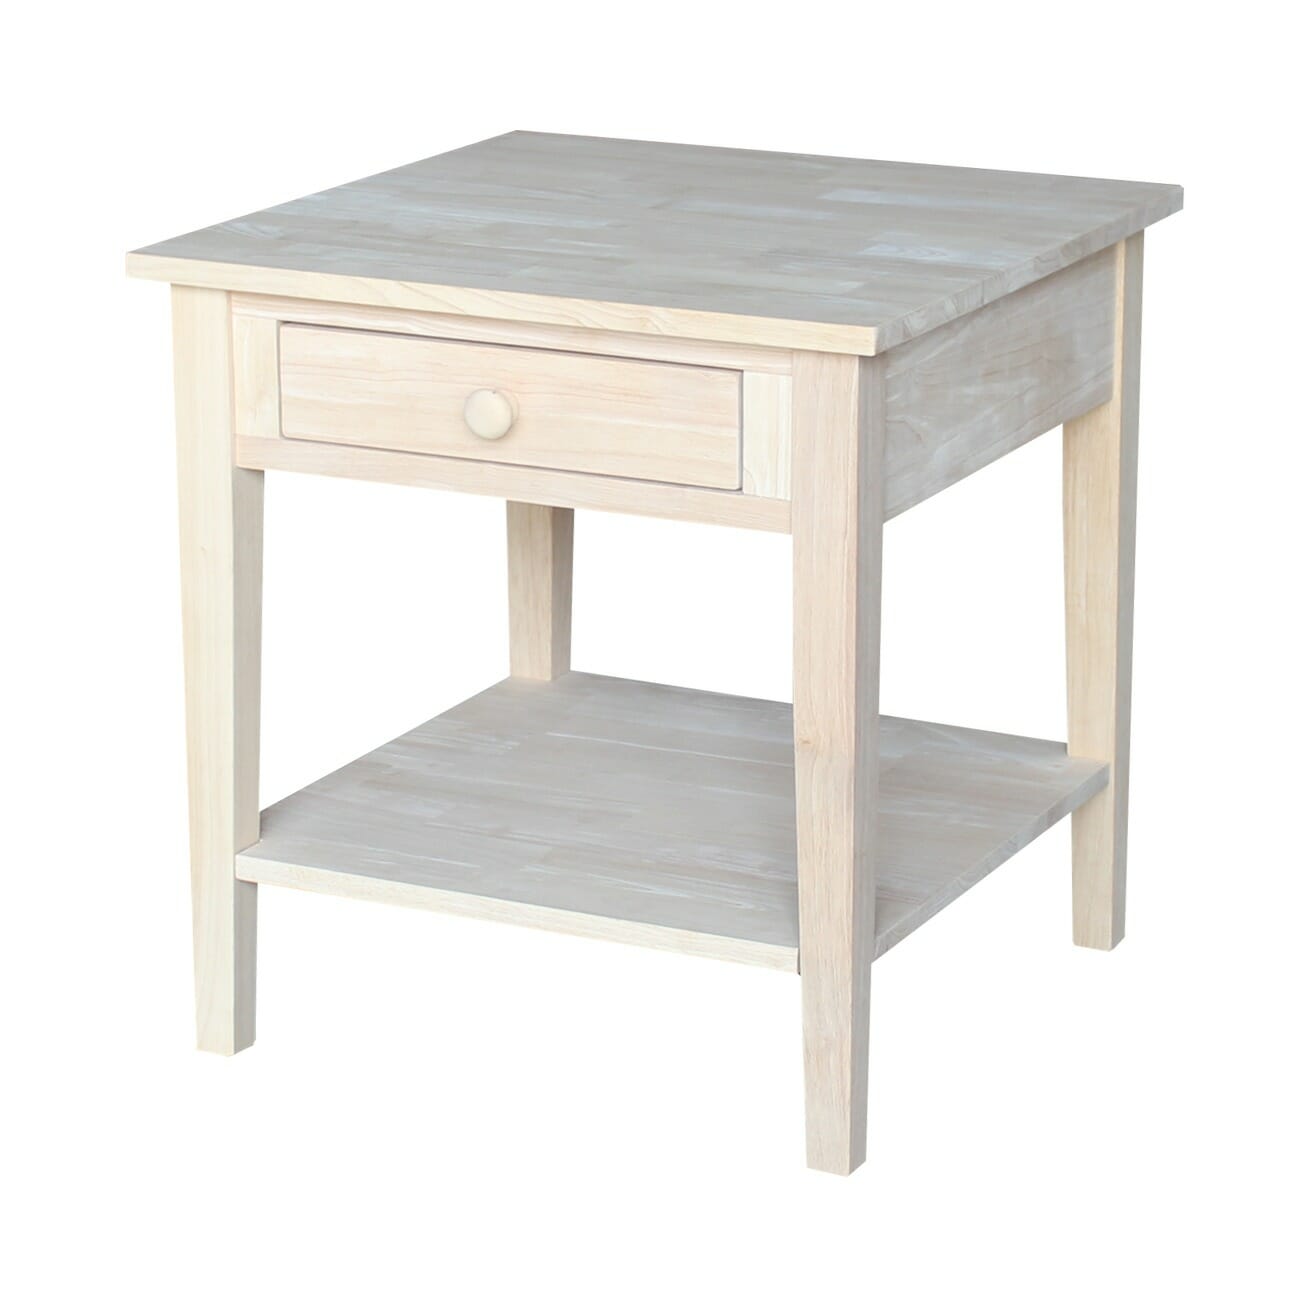 Ot 8e Spencer End Table With Drawer, Unfinished Wood Side Table